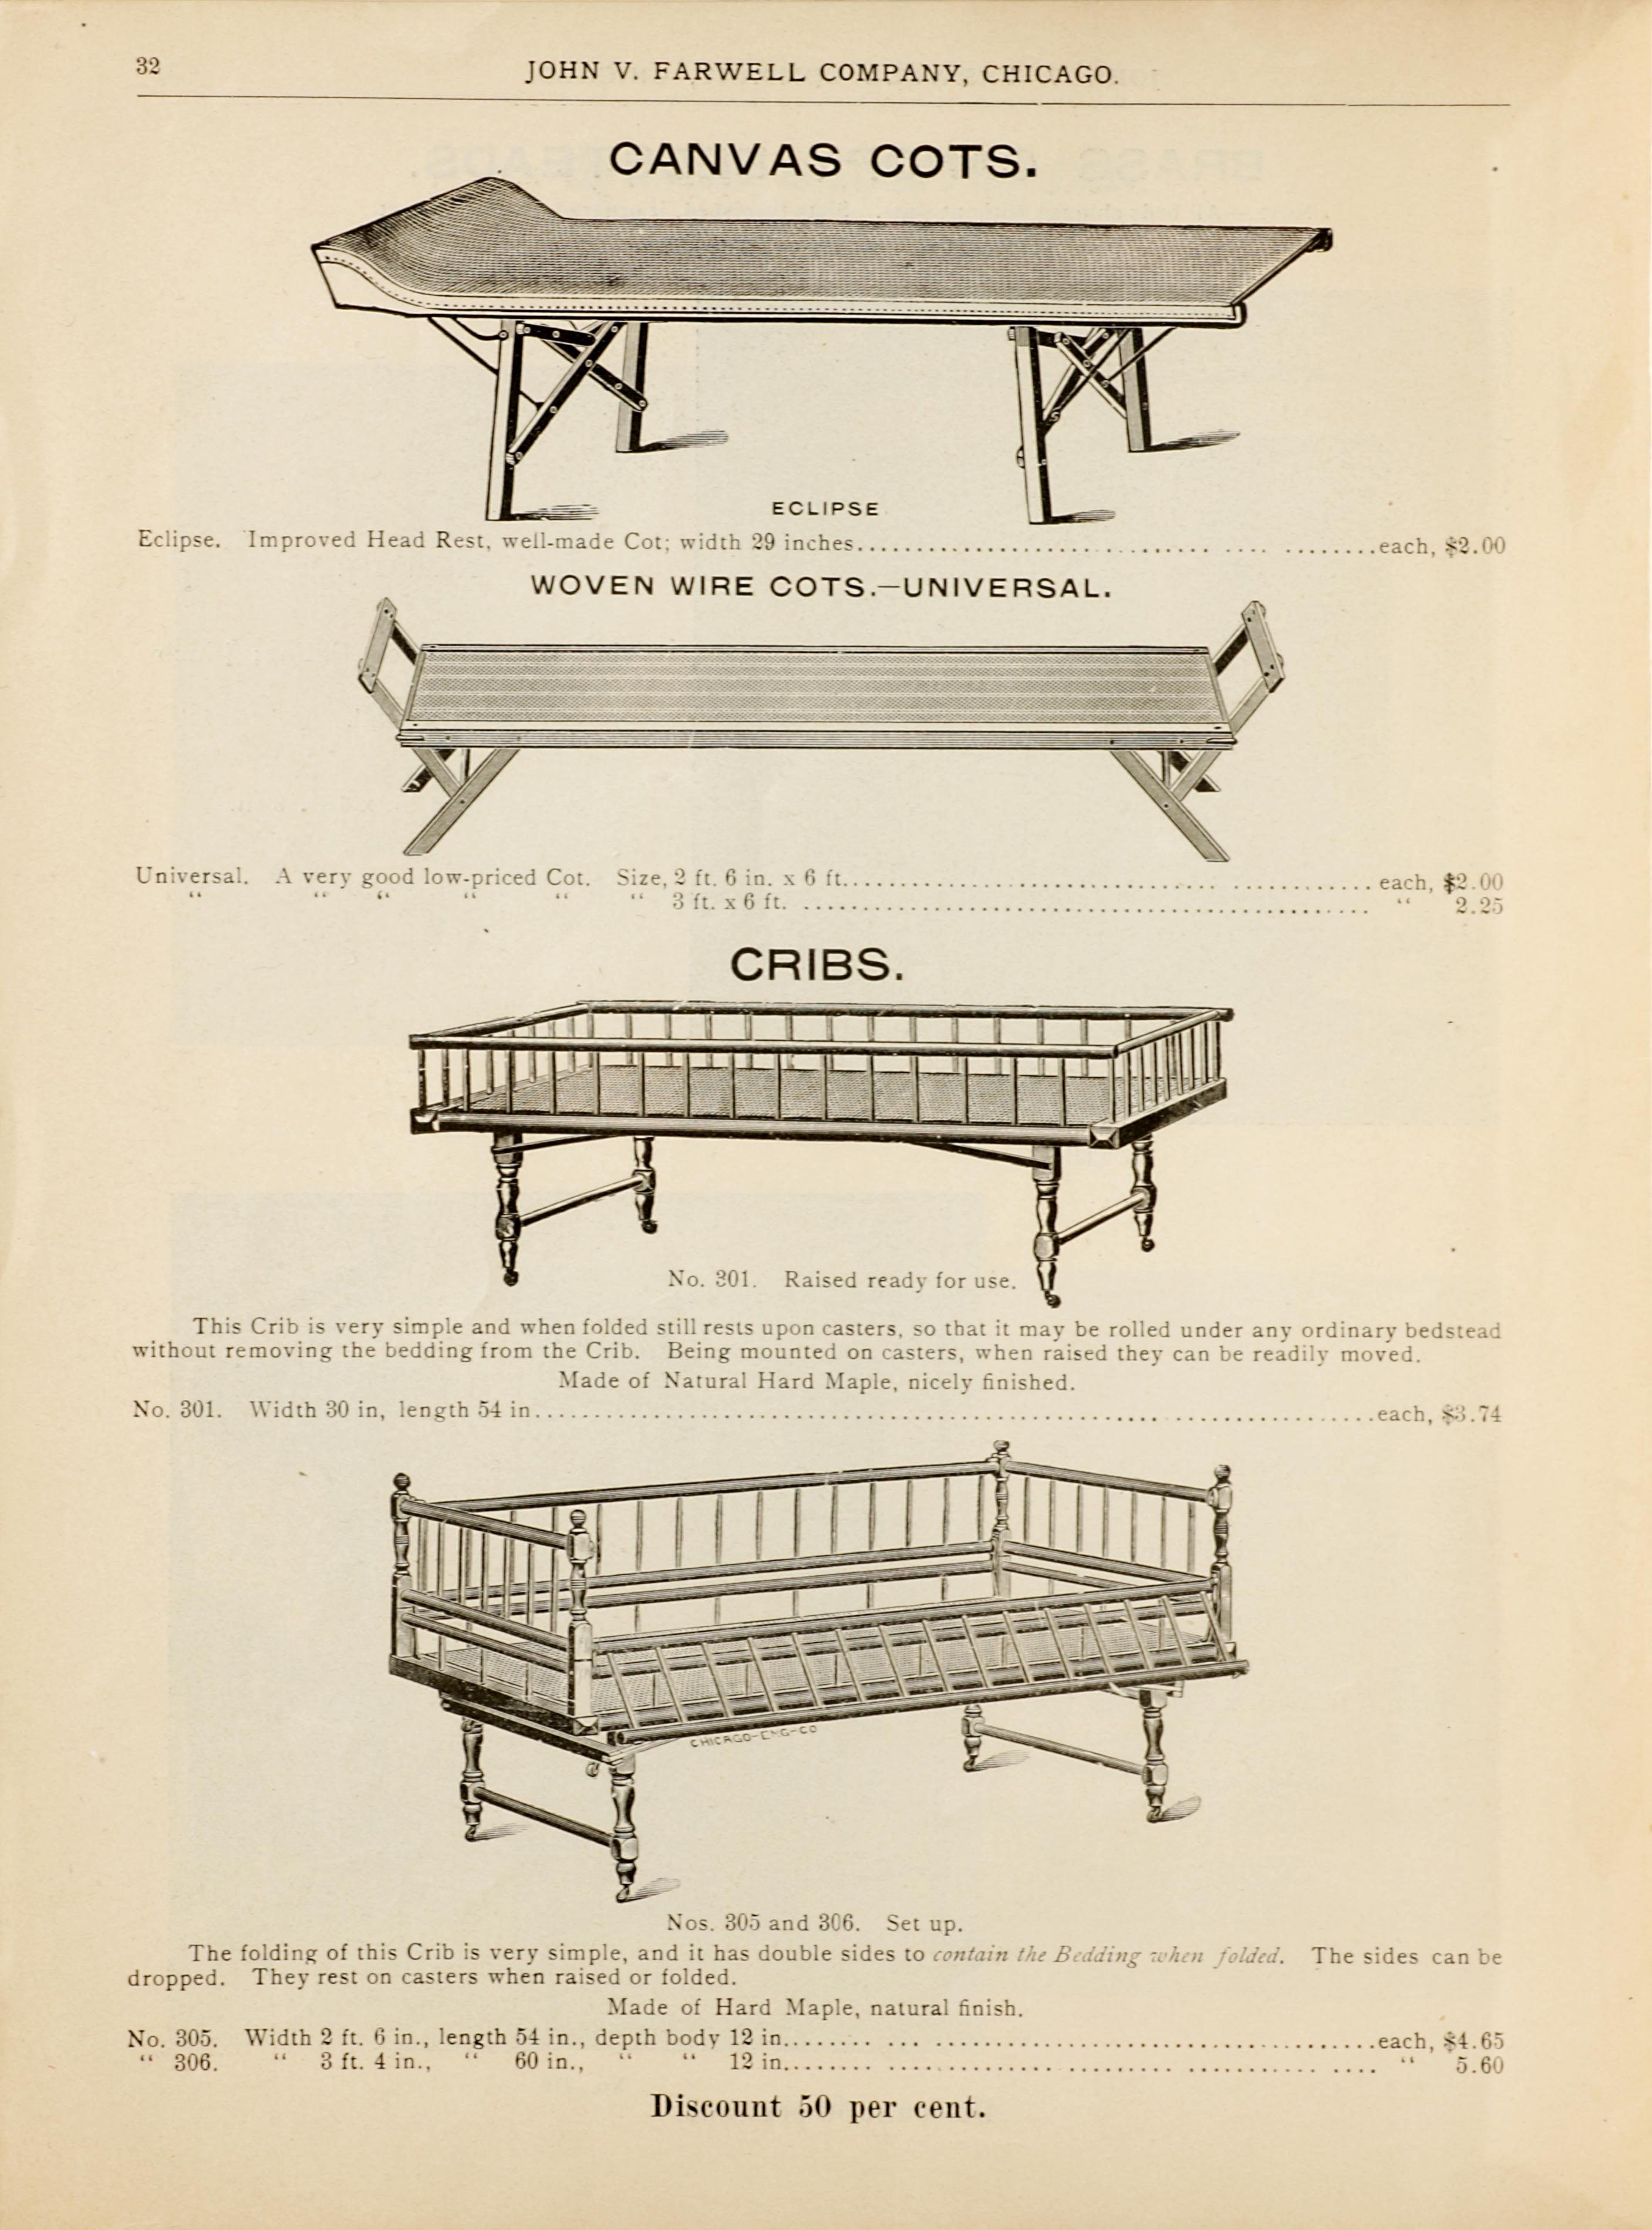 John V. Farwell Iron Bed Catalog, Chicago 1895- Page 24